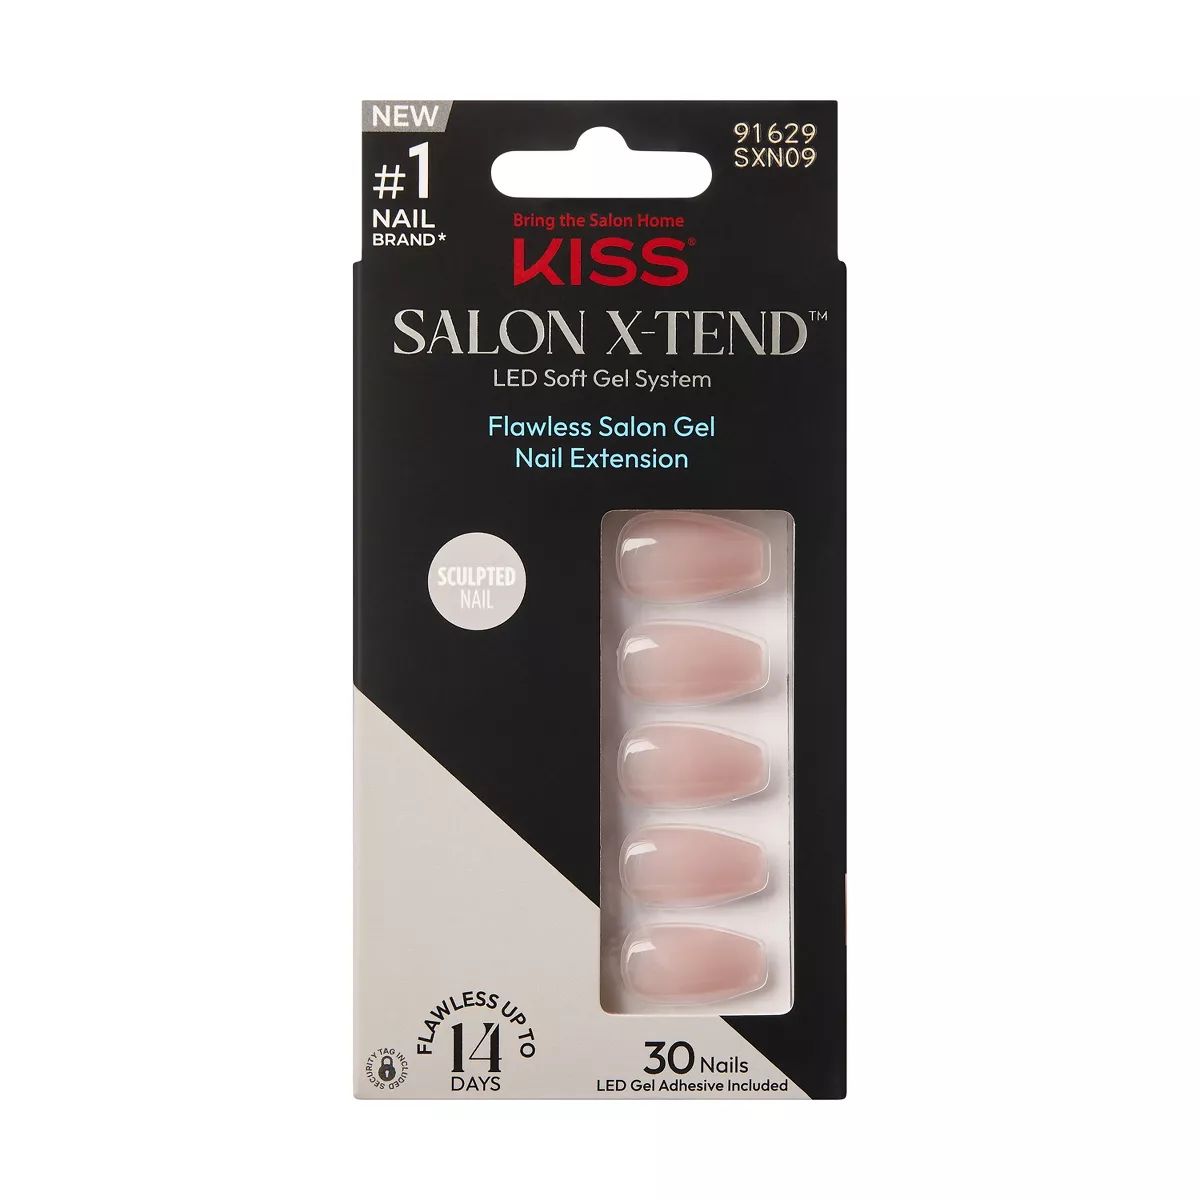 KISS Products Salon X-tend Fake Nails - Change It - 34ct | Target